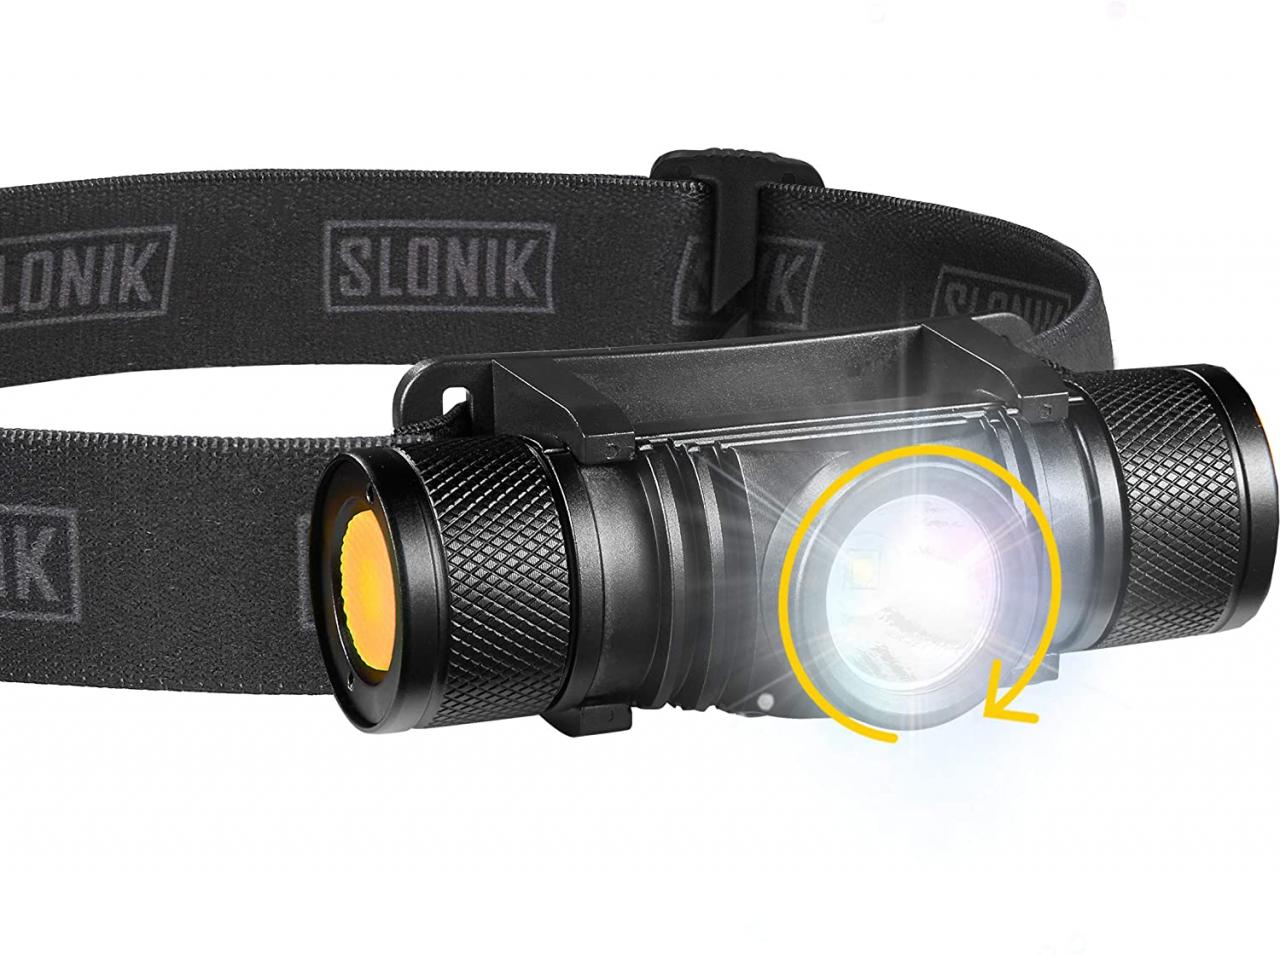 Buy SLONIK 500 Lumen Rechargeable LED Headlamp w/ 2200 mAh Battery -  Durable, Waterproof and Dustproof Headlight - Xtreme Bright 300 ft Beam -  Camping and Hiking Gear Online in Hong Kong. B07K2SQQX7